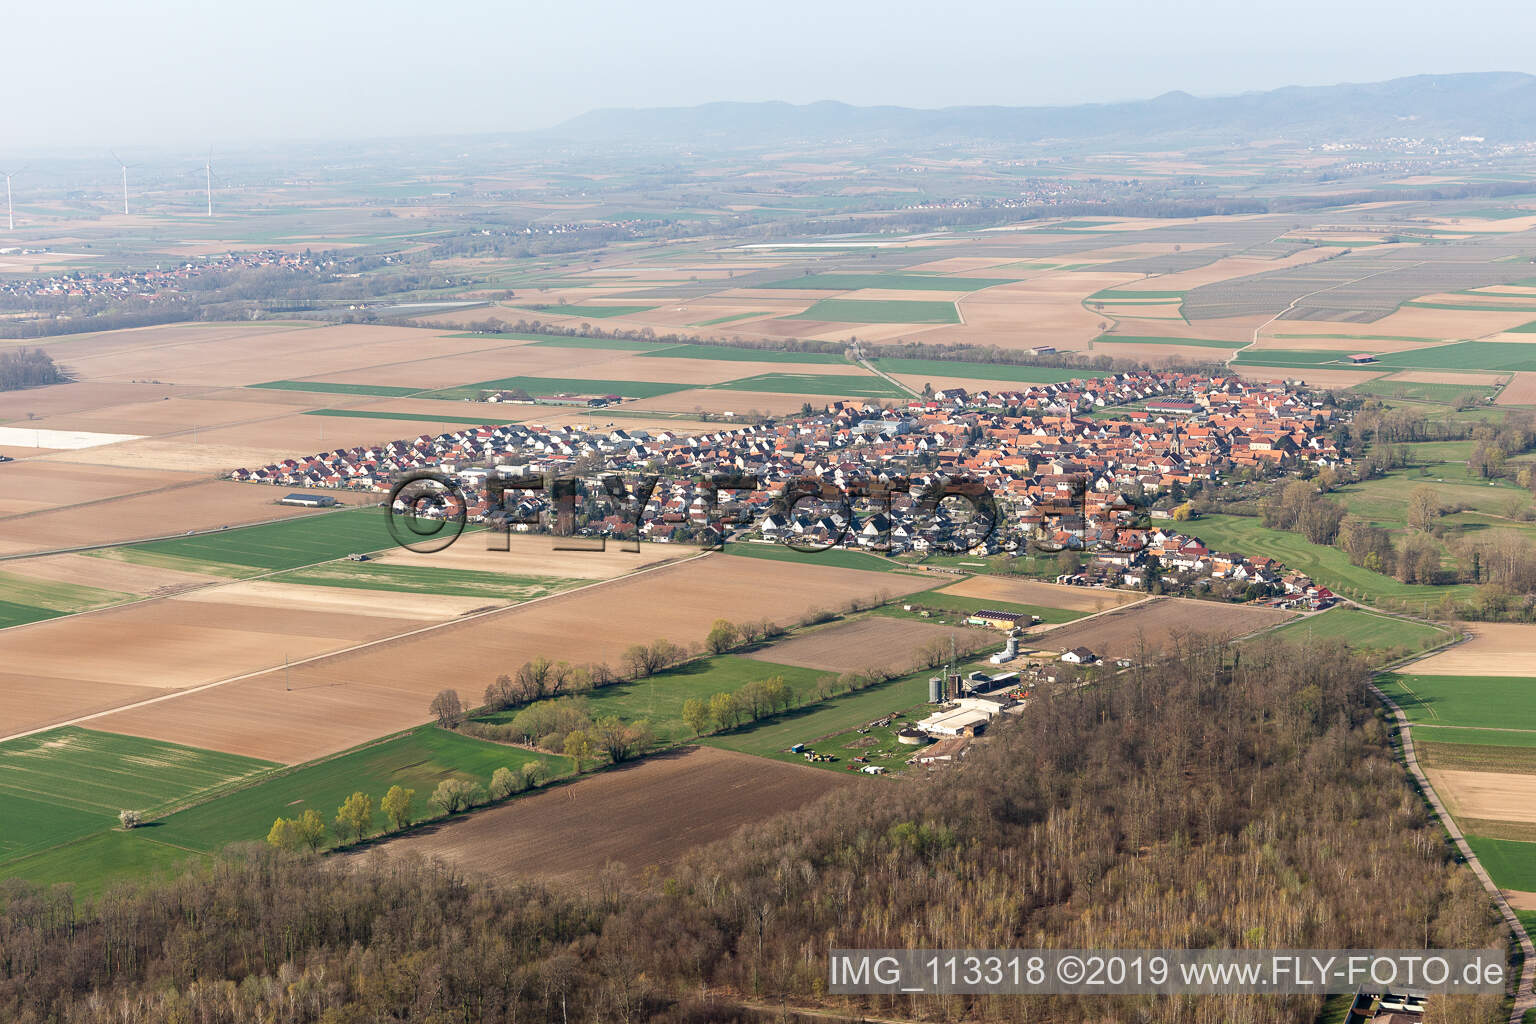 Aerial view of Steinweiler in the state Rhineland-Palatinate, Germany